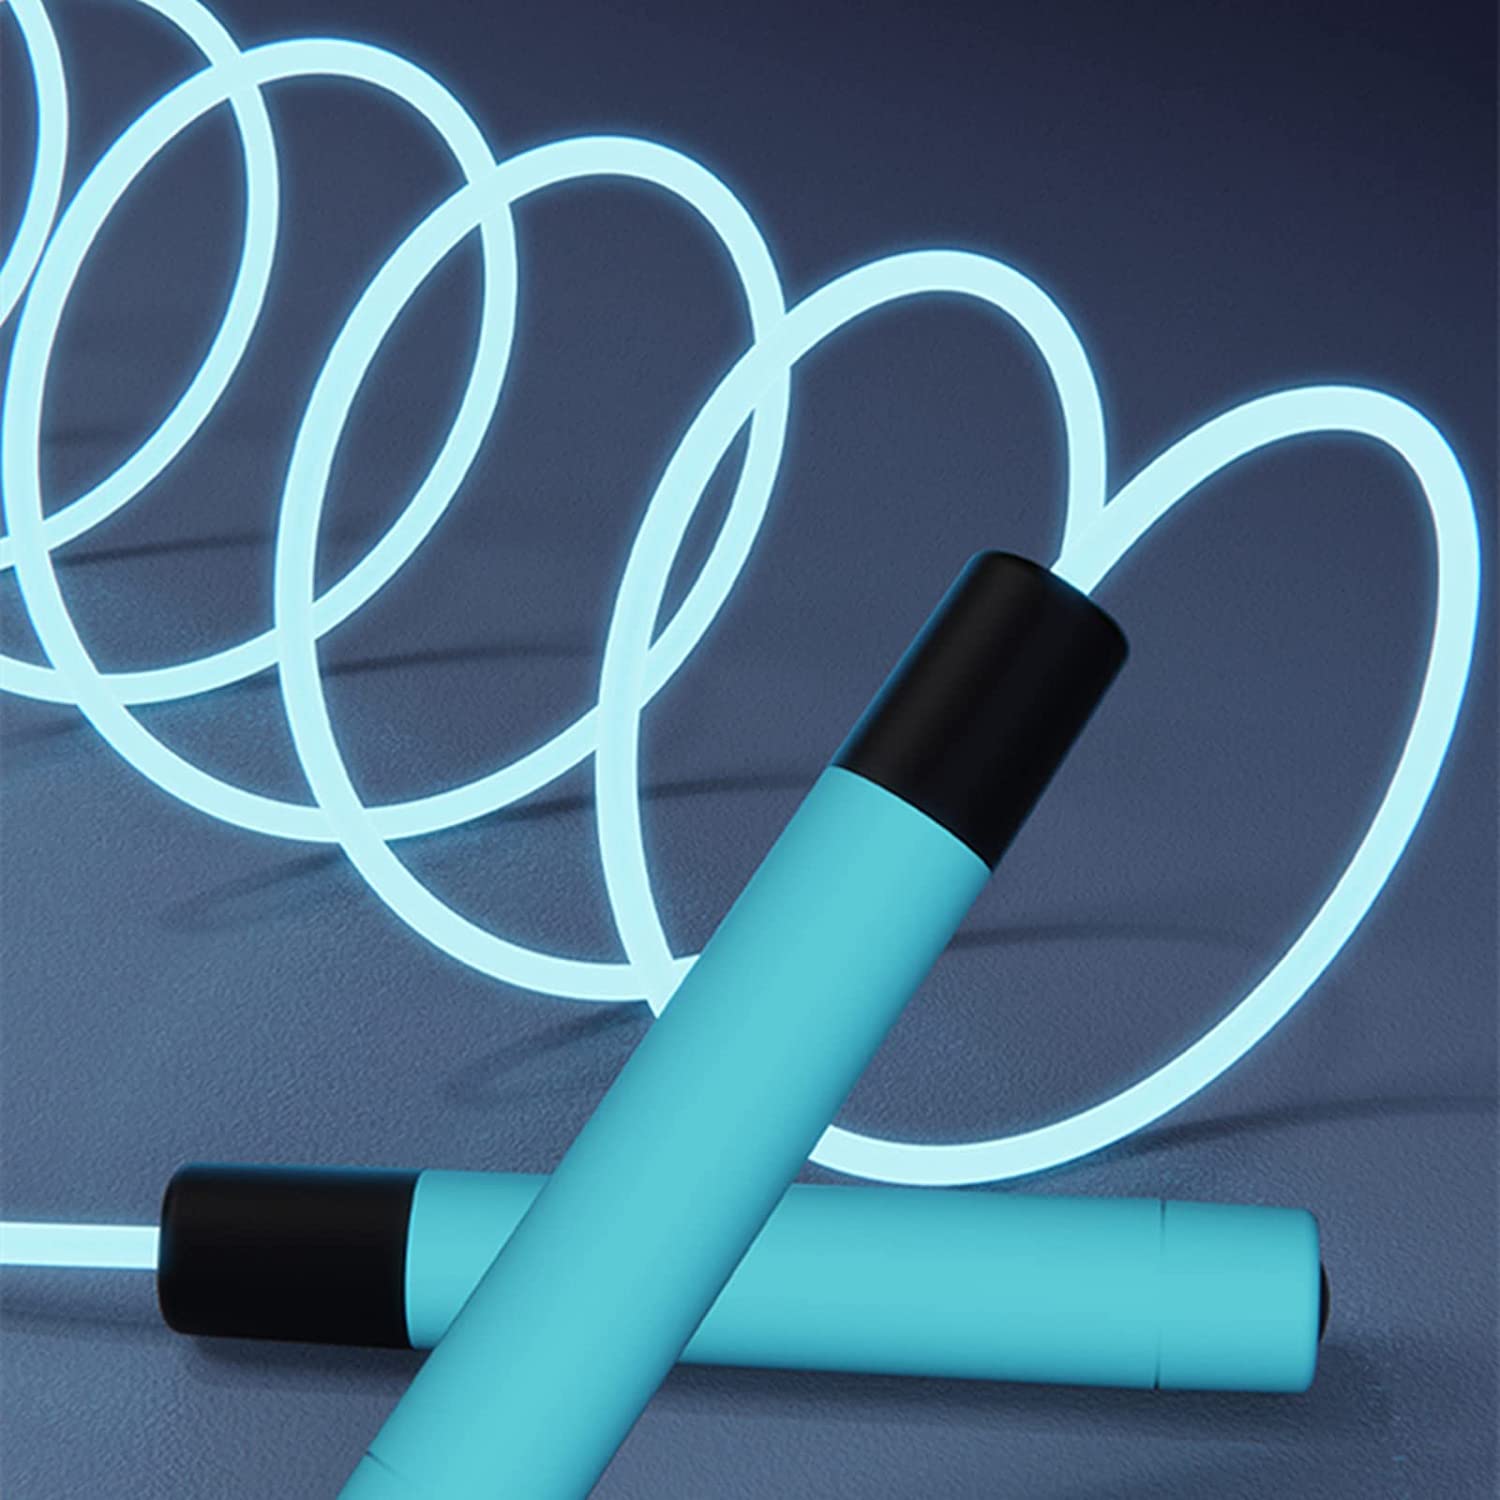 ump Role, Lump Rope for Kids LED Adjustable Light Up Jump Rope Applicable To Children and Adults To Exercise, Keep Fitness or Relax